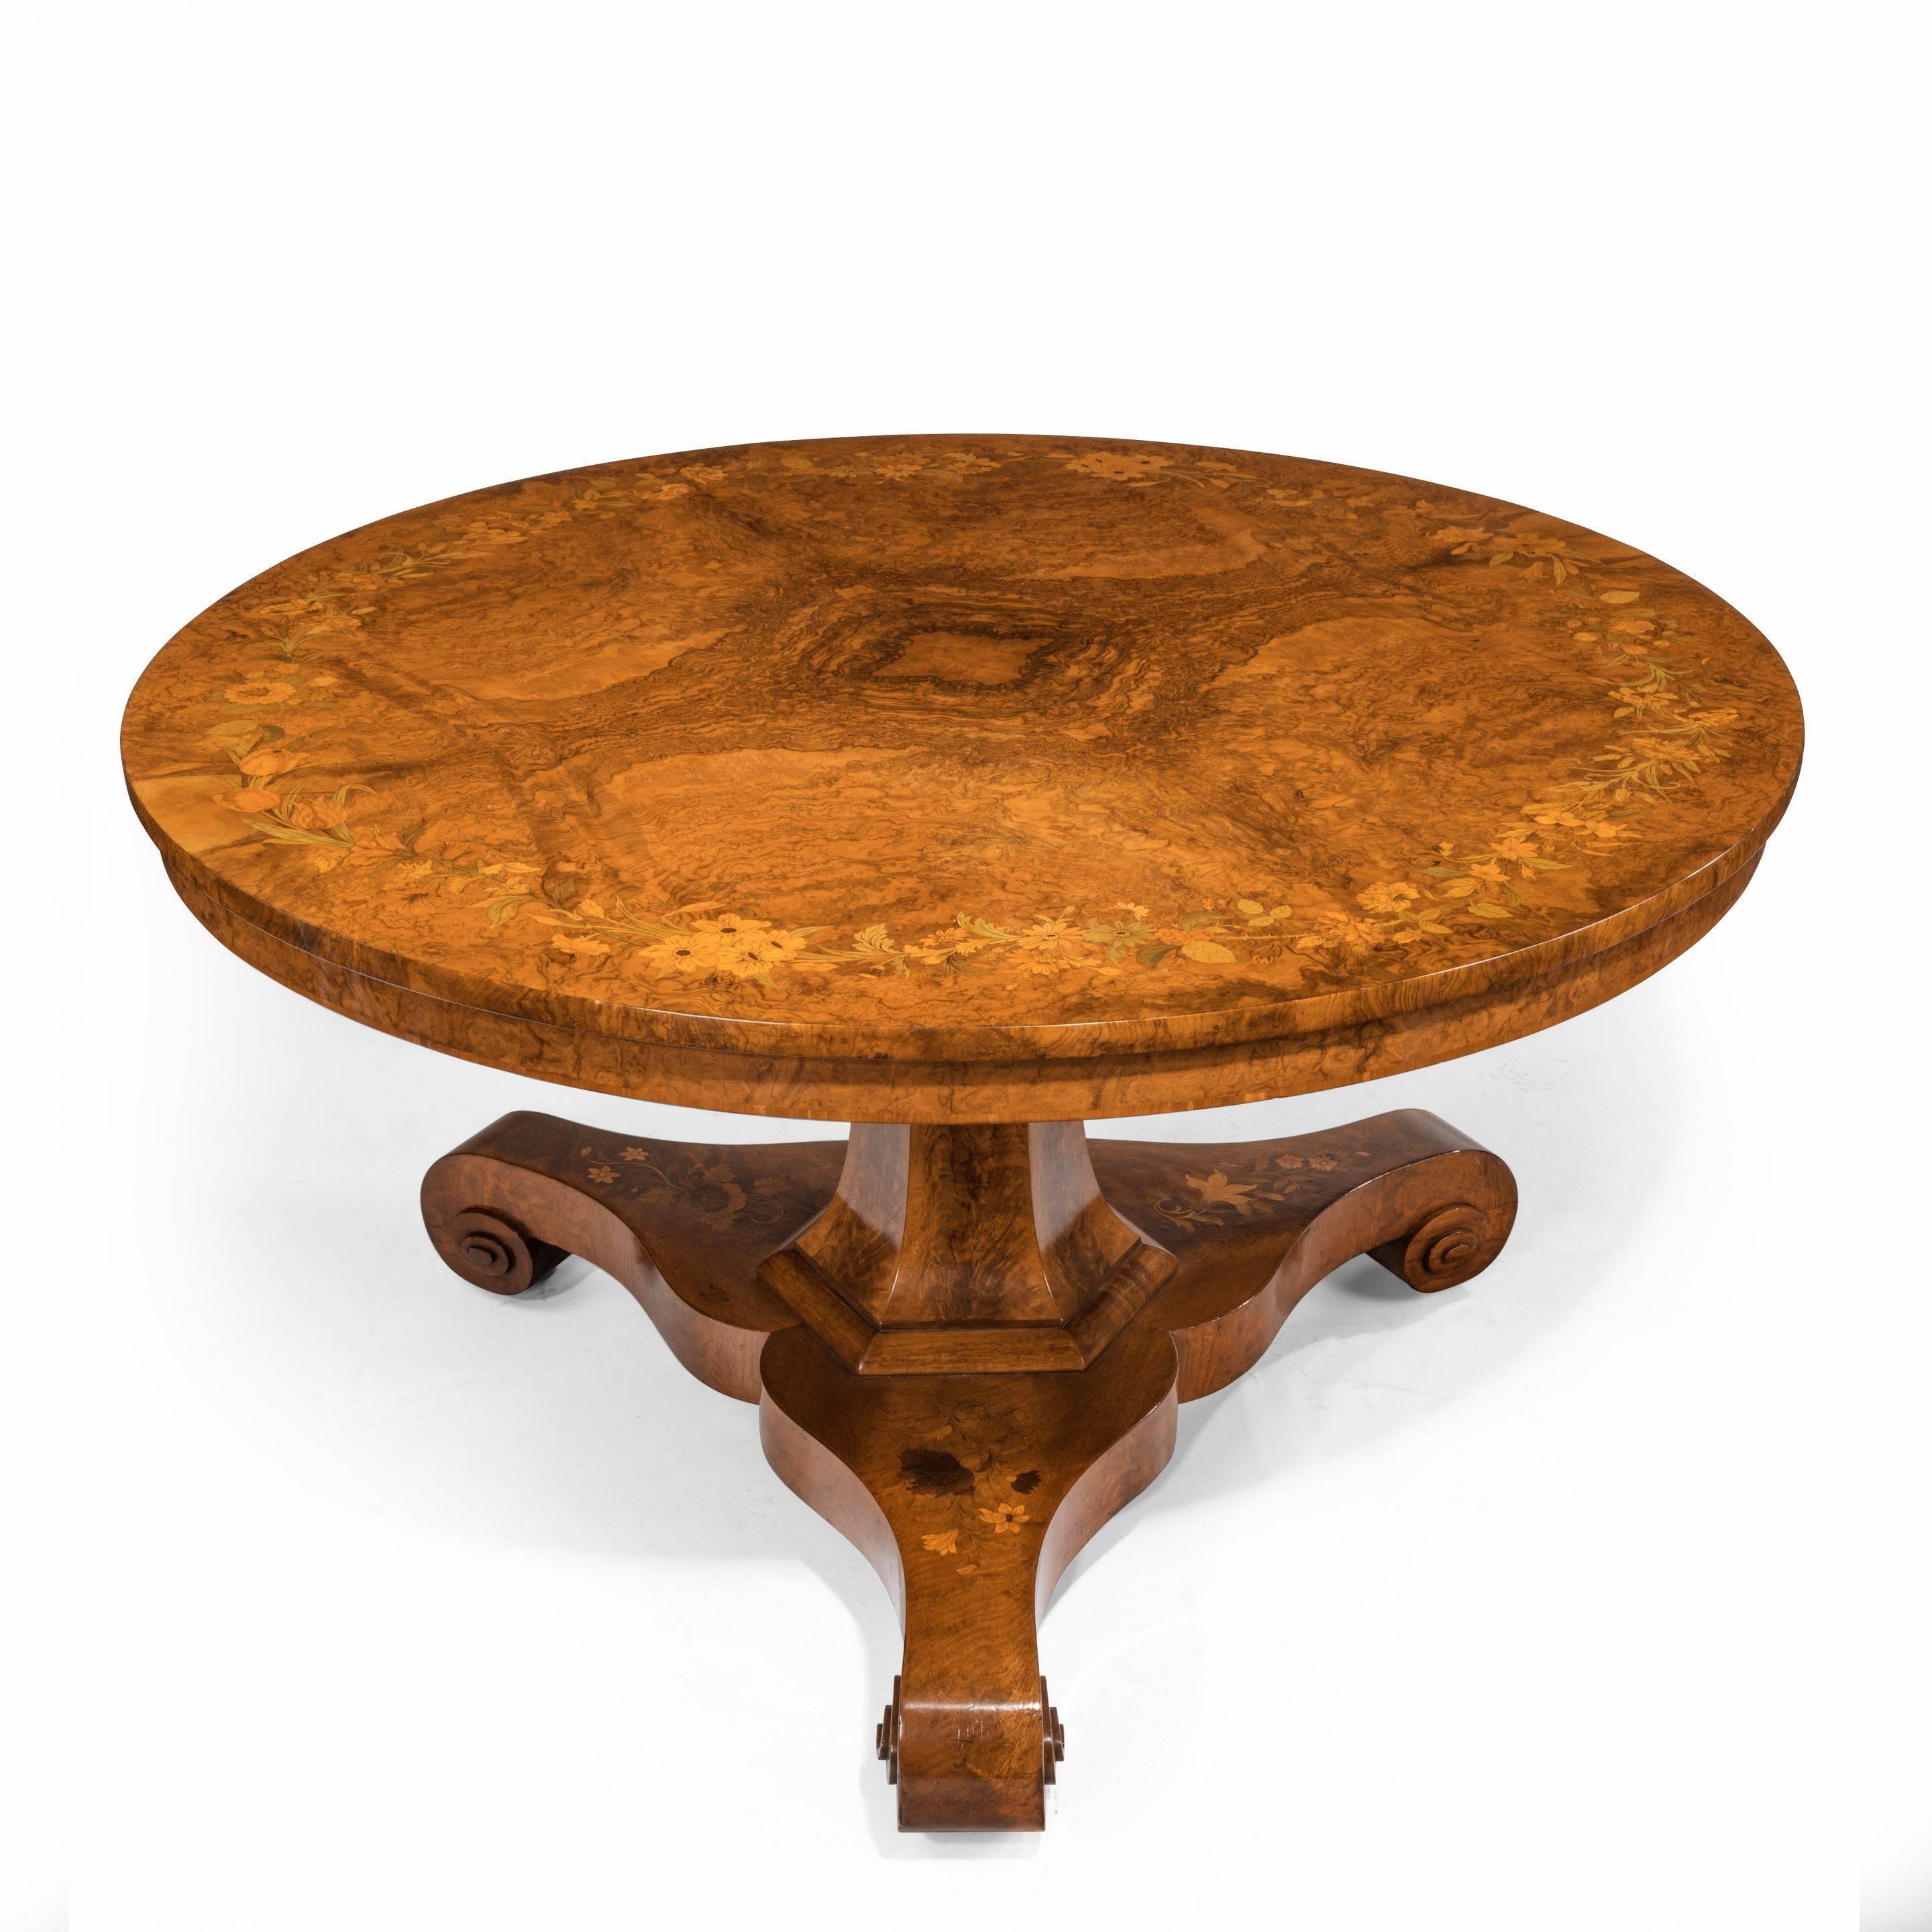 An early Victorian walnut marquetry centre table, attributed to Edward Holmes Baldock, of circular form with a superb quarter veneered burr walnut top inlaid with a garland of naturalistic British flowers in stained boxwoods, all on a flared